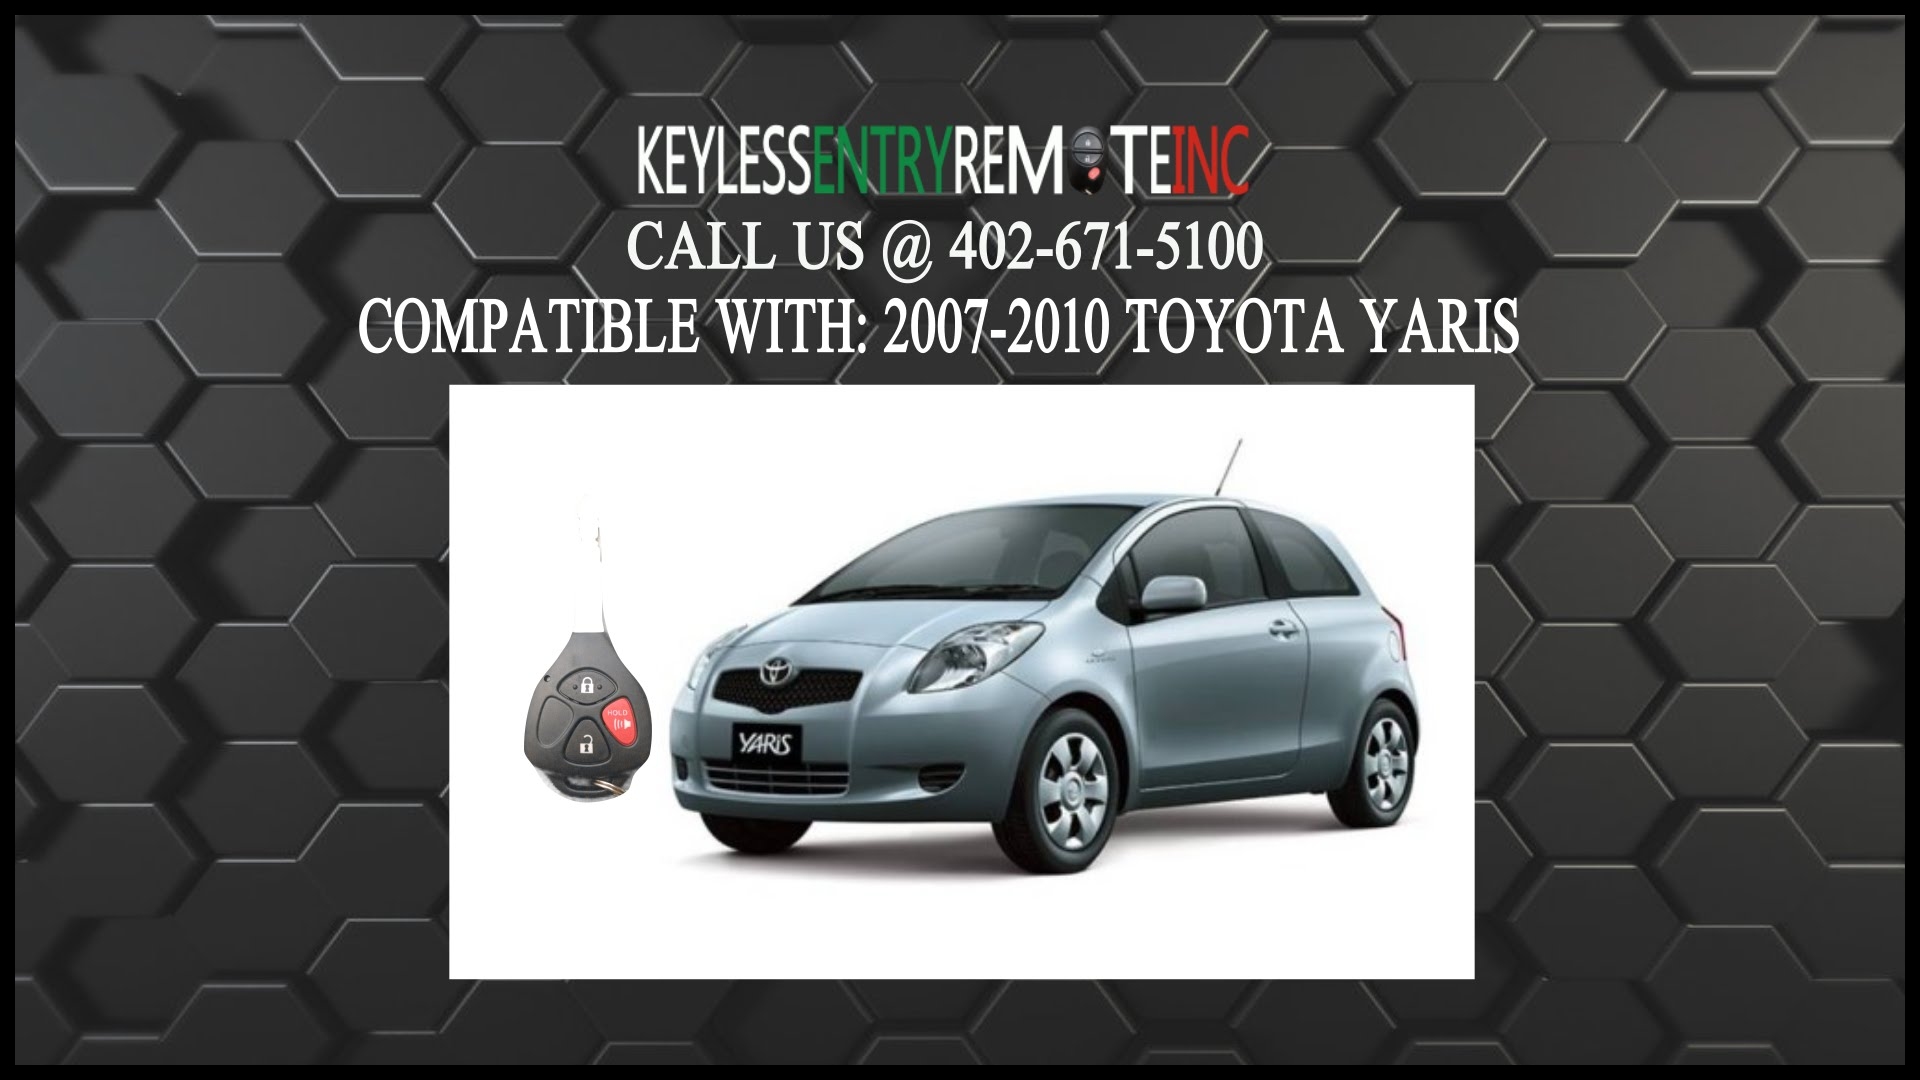 How To Replace Toyota Yaris Key Fob Battery 2007 2008 2009 2010